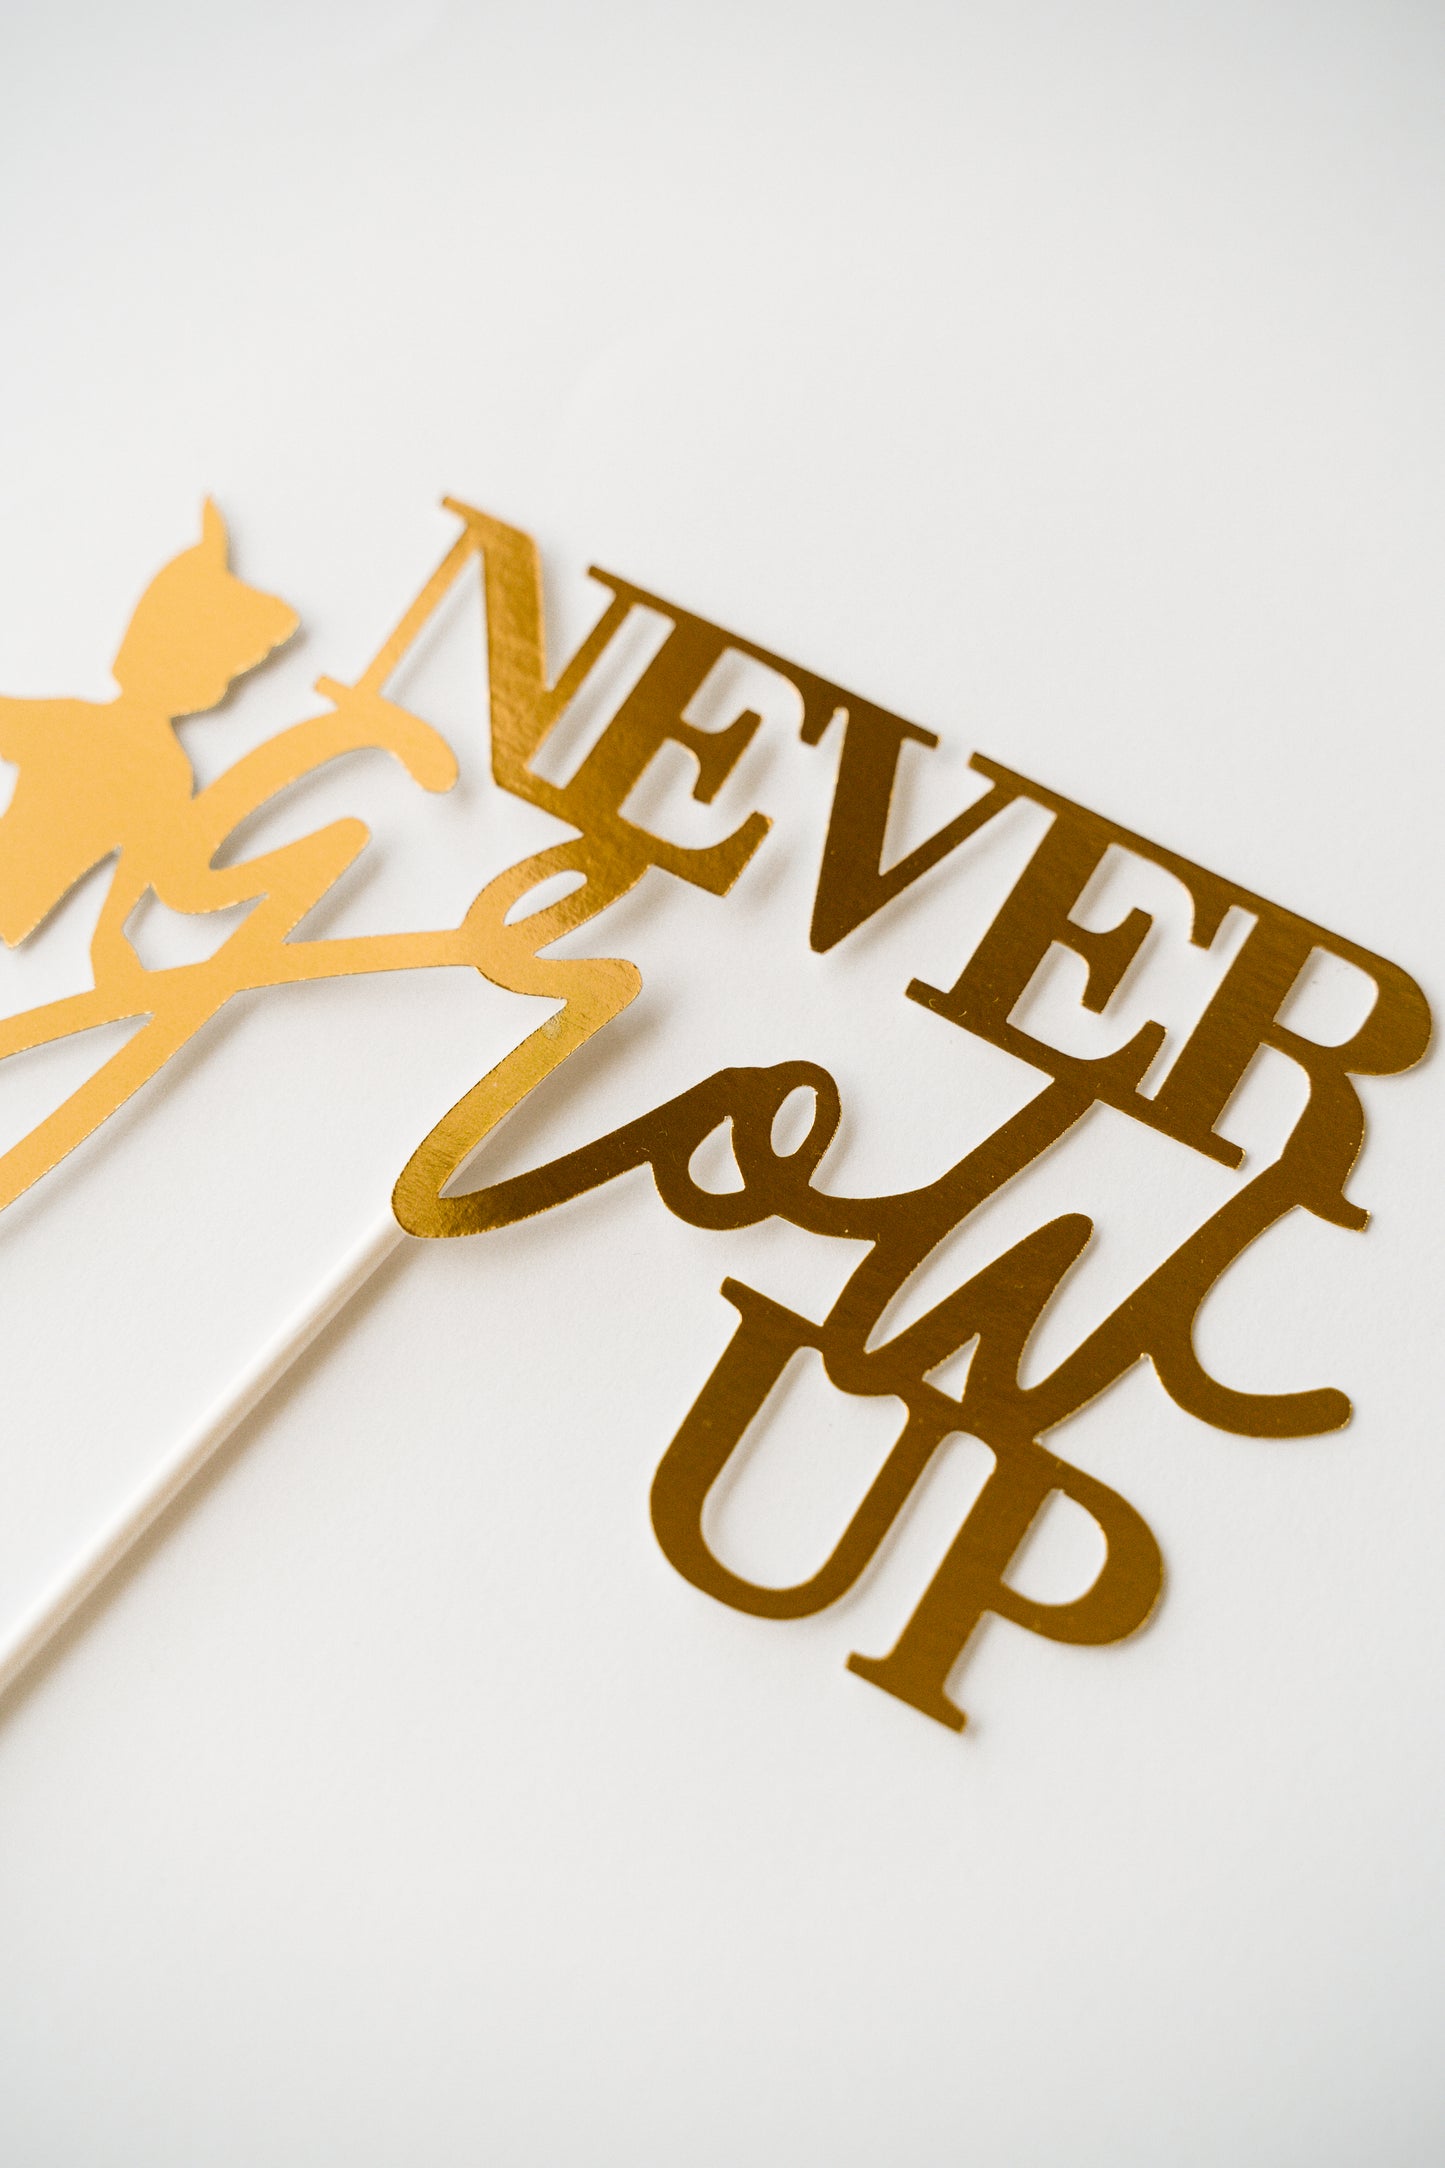 Never grow up cake topper